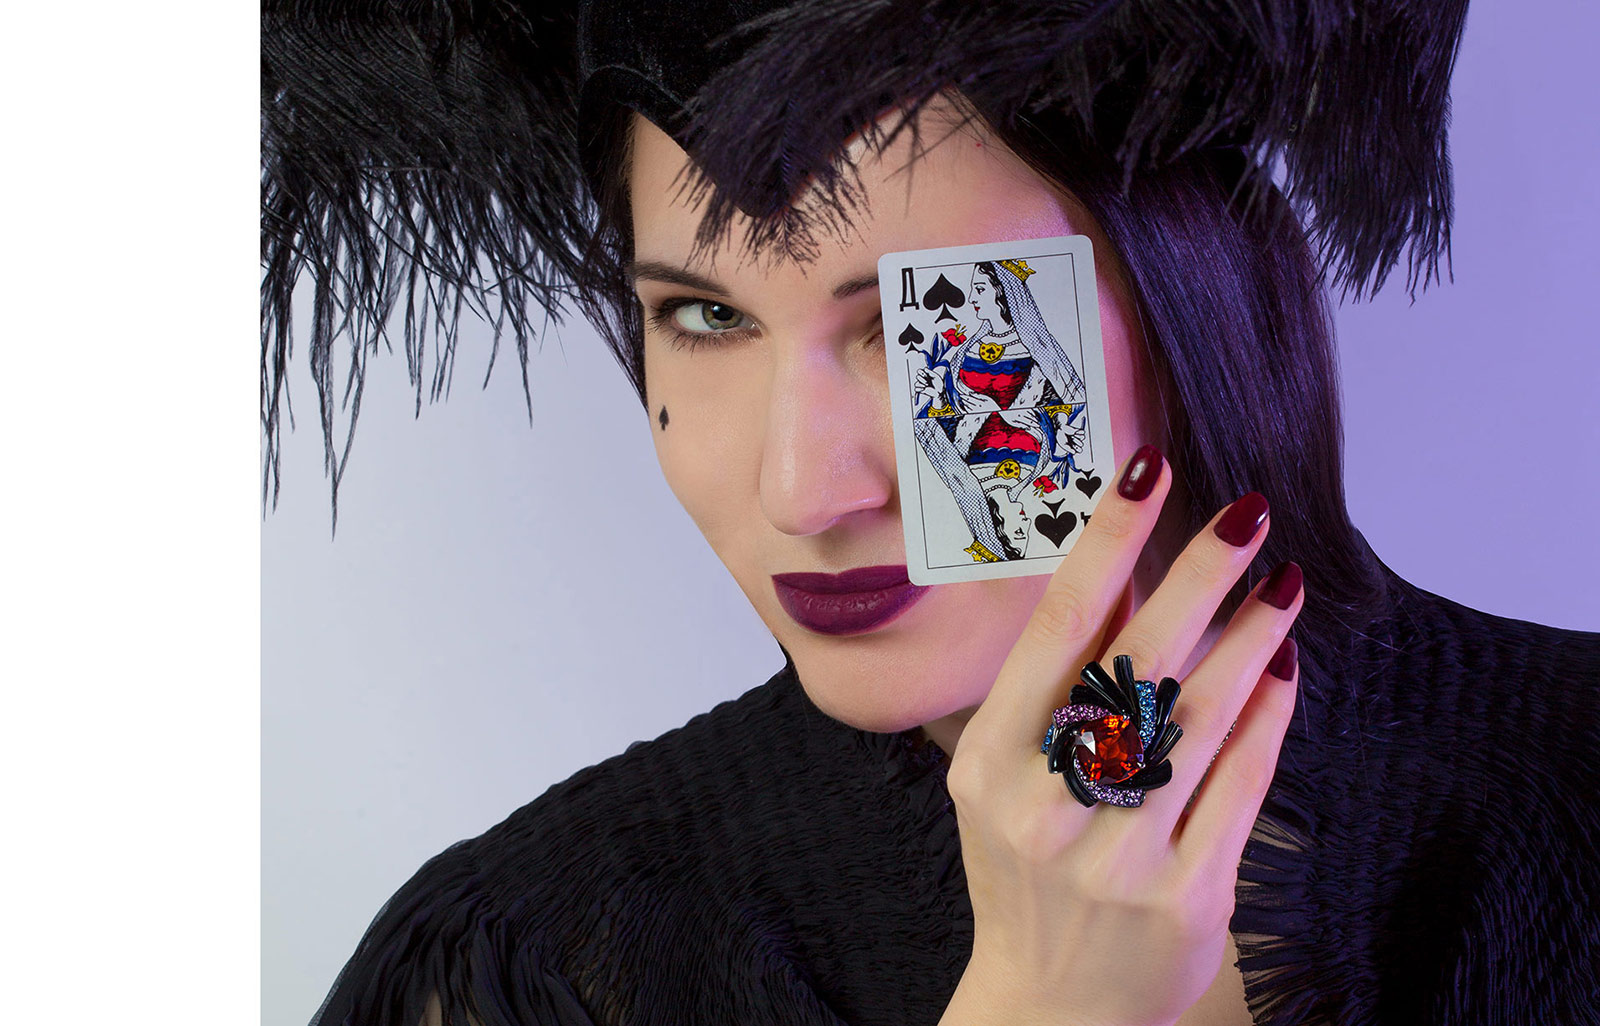 This Lorenz Baumer Nébuleuse Black Magic ring from the Black Magic collection with a 16.11 carat spessartite garnet, blue, pink and purple sapphires in white gold with black rhodium is the ideal accompaniment to a Lita Weizman dress and a headpiece by Maison Krasnova